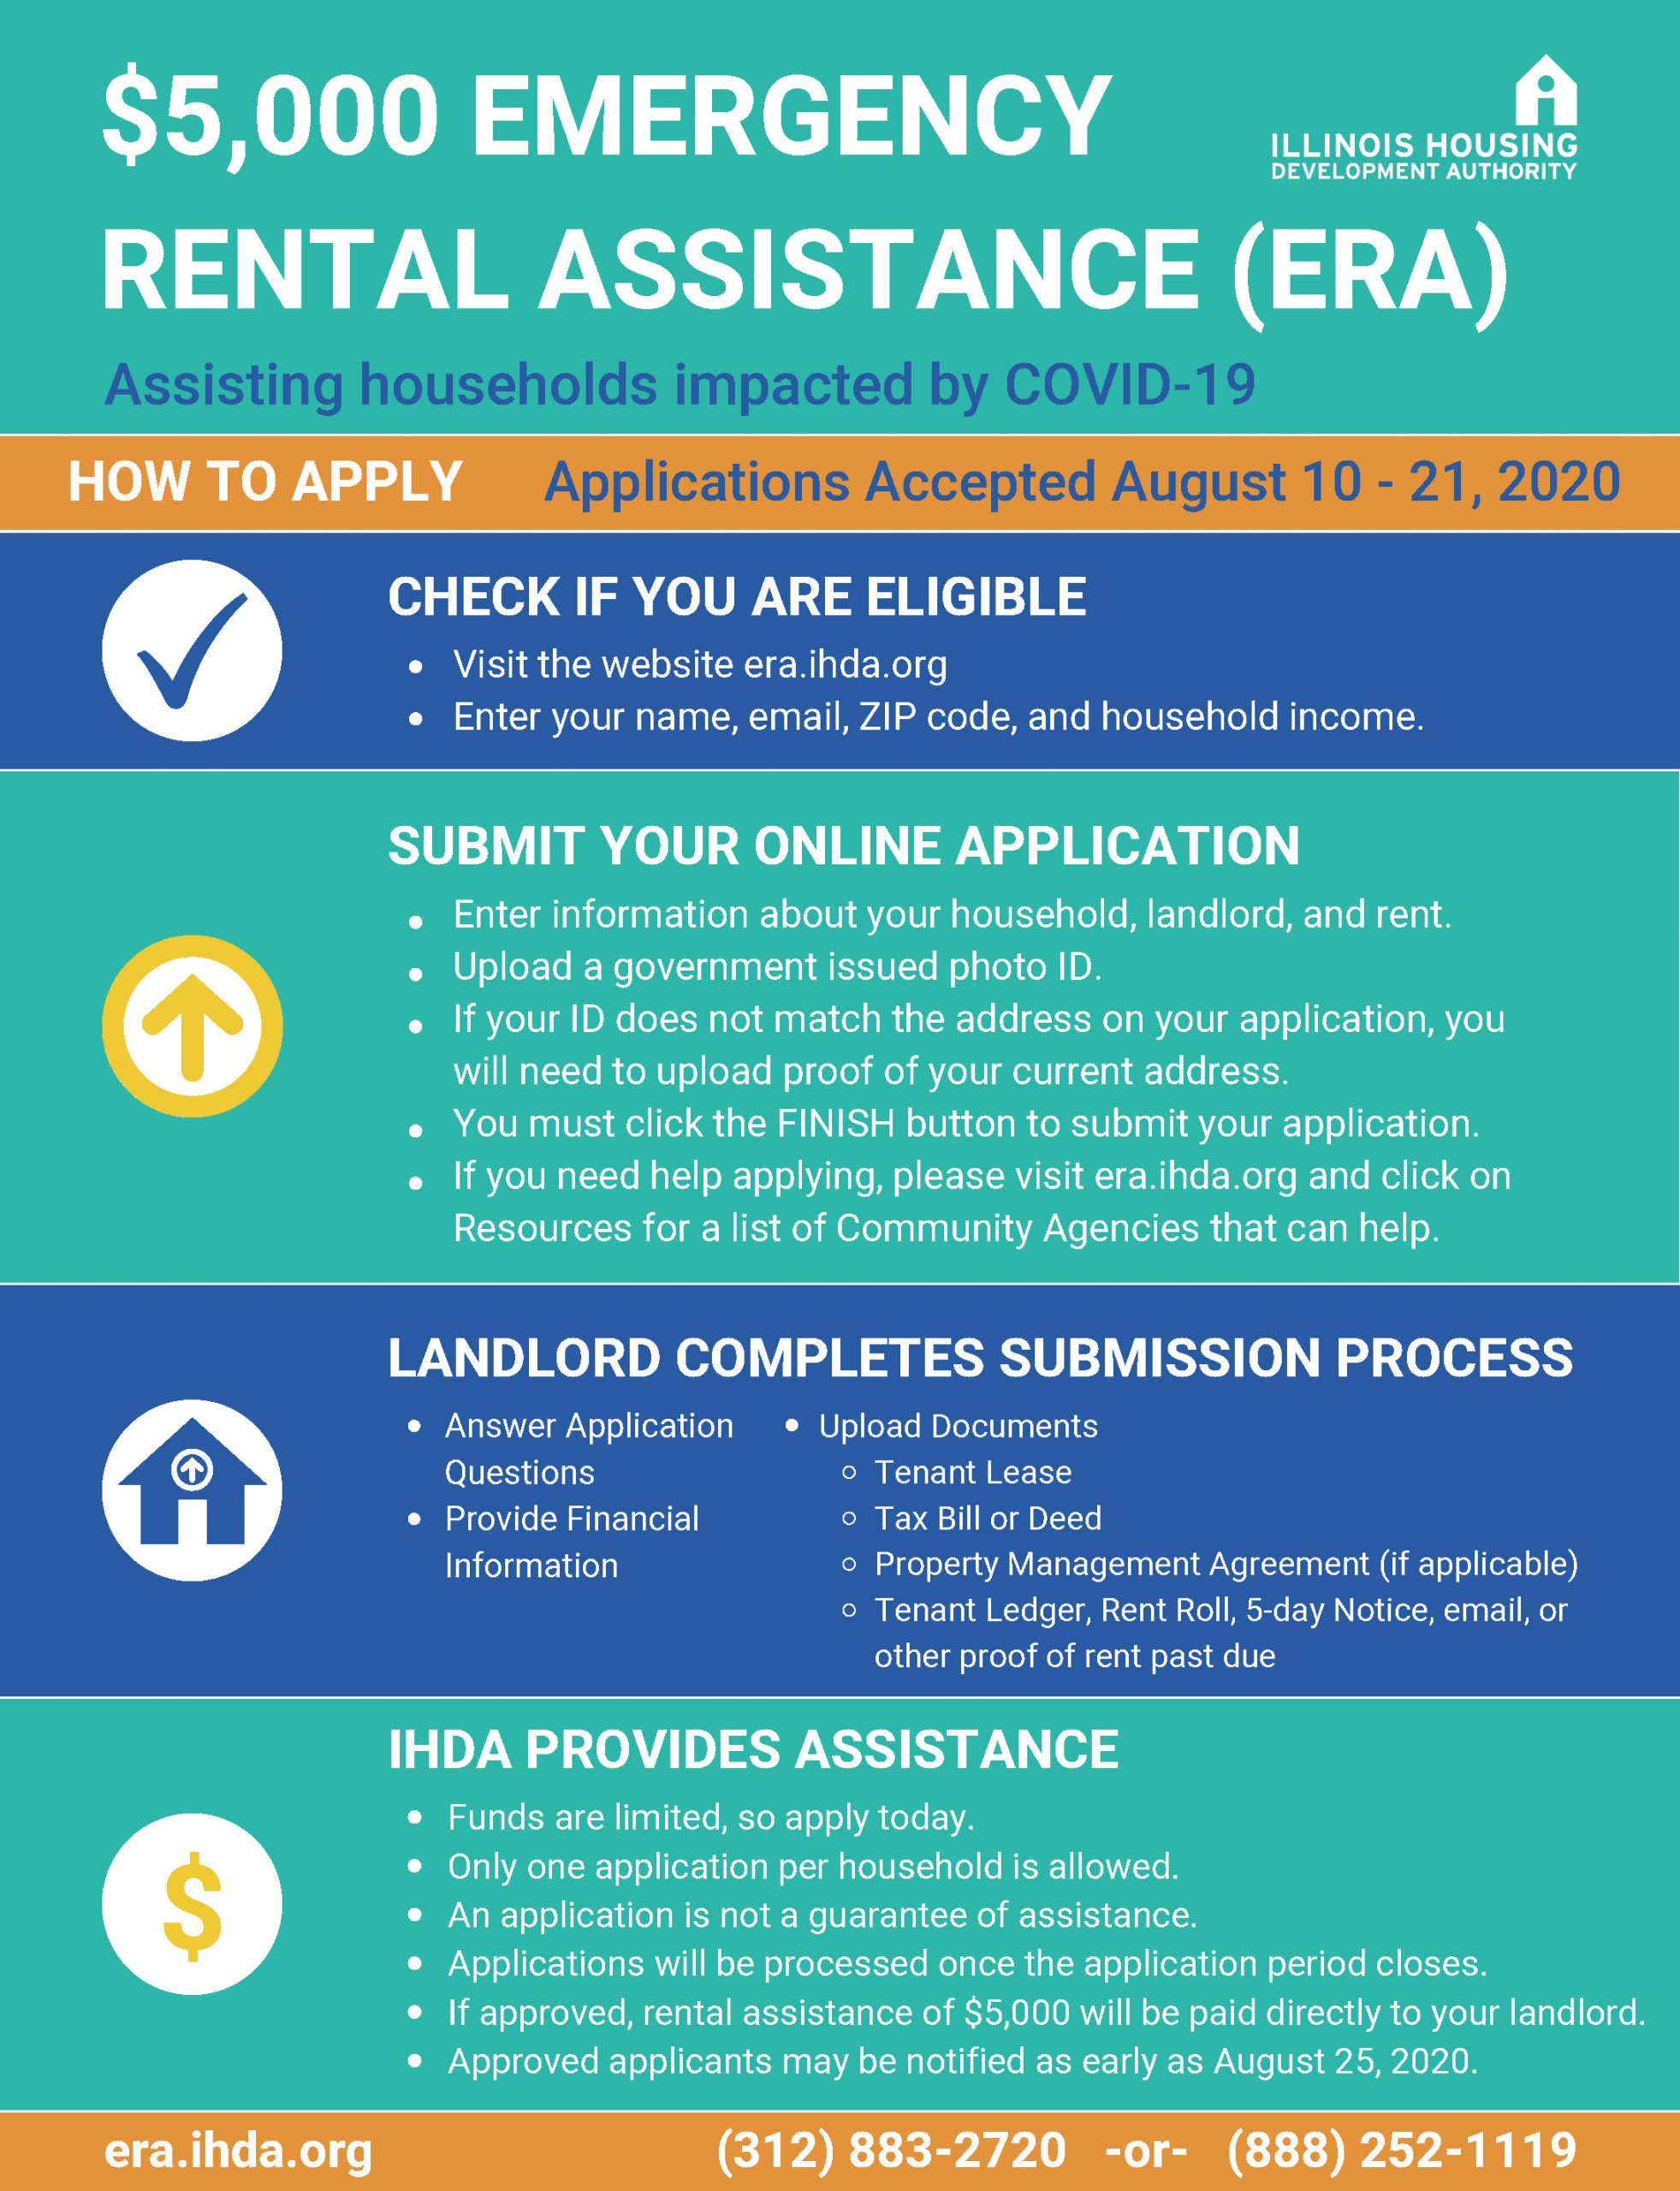 Emergency Rental Assistance Available through IHDA